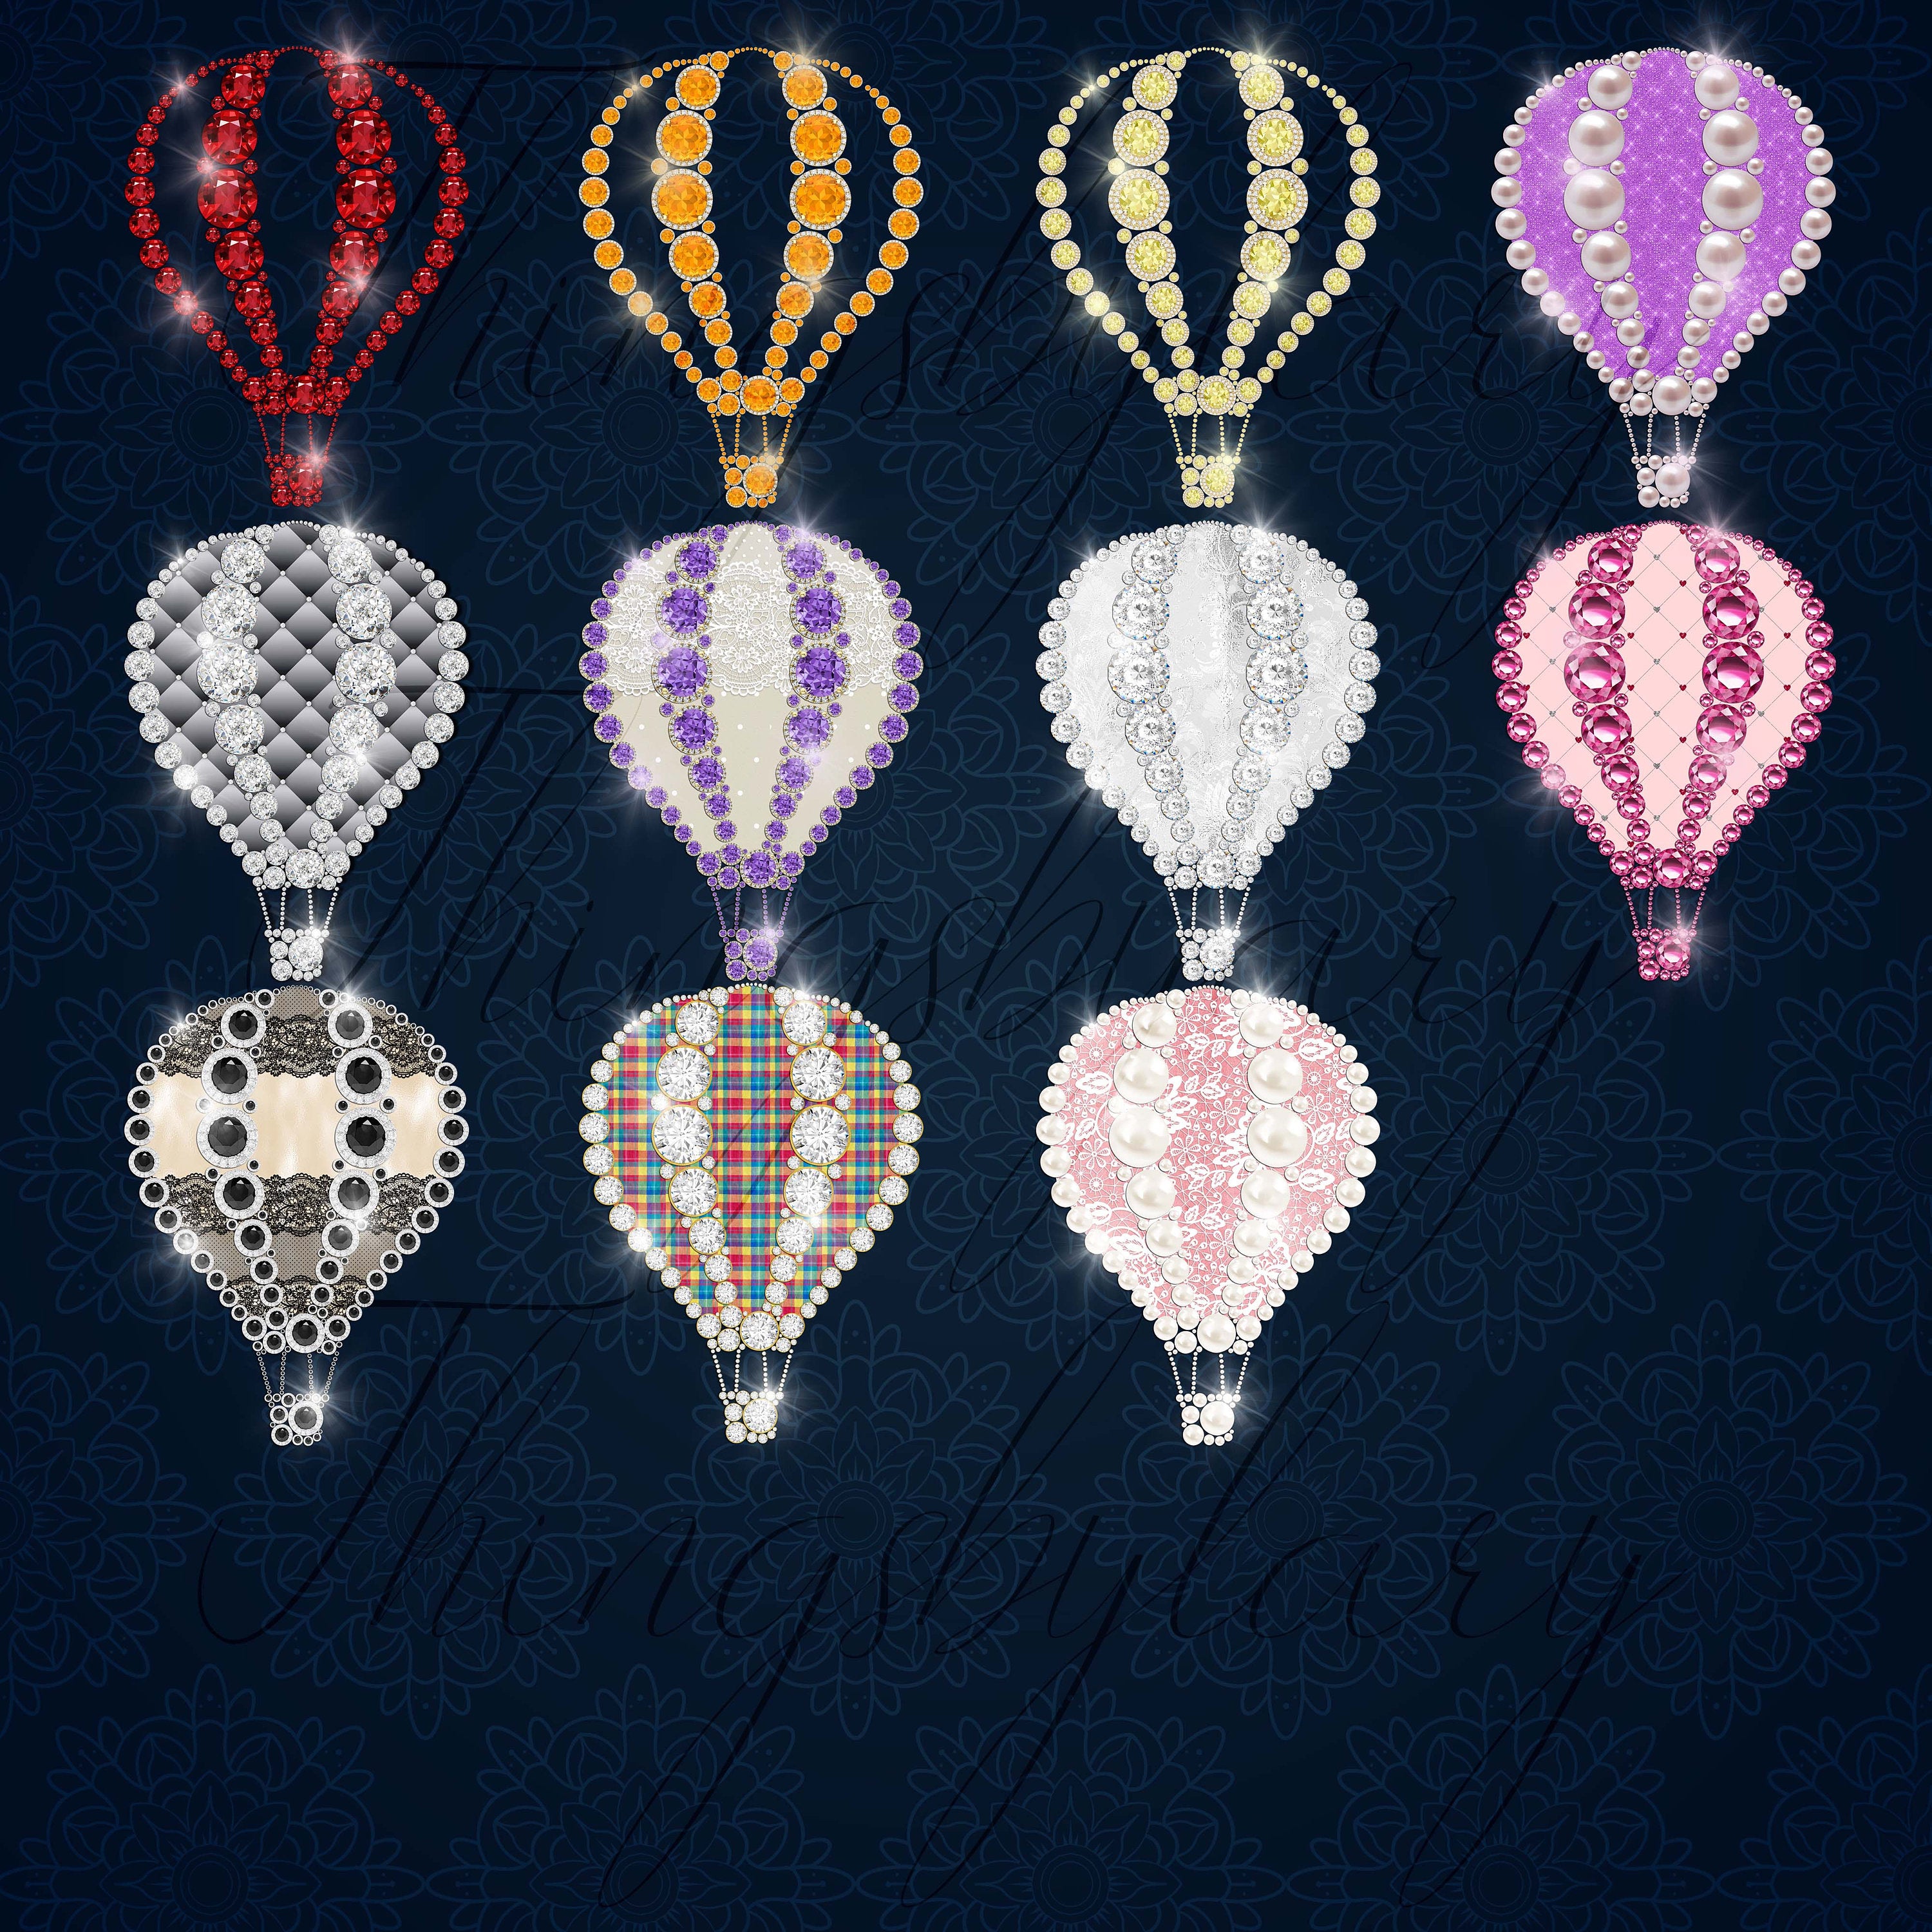 43 Diamond Pearl Gold Glitter Rainbow Hot Air Balloons 300 Dpi PNG Instant Download Commercial Use Real Diamond Vacation Travel Adventure